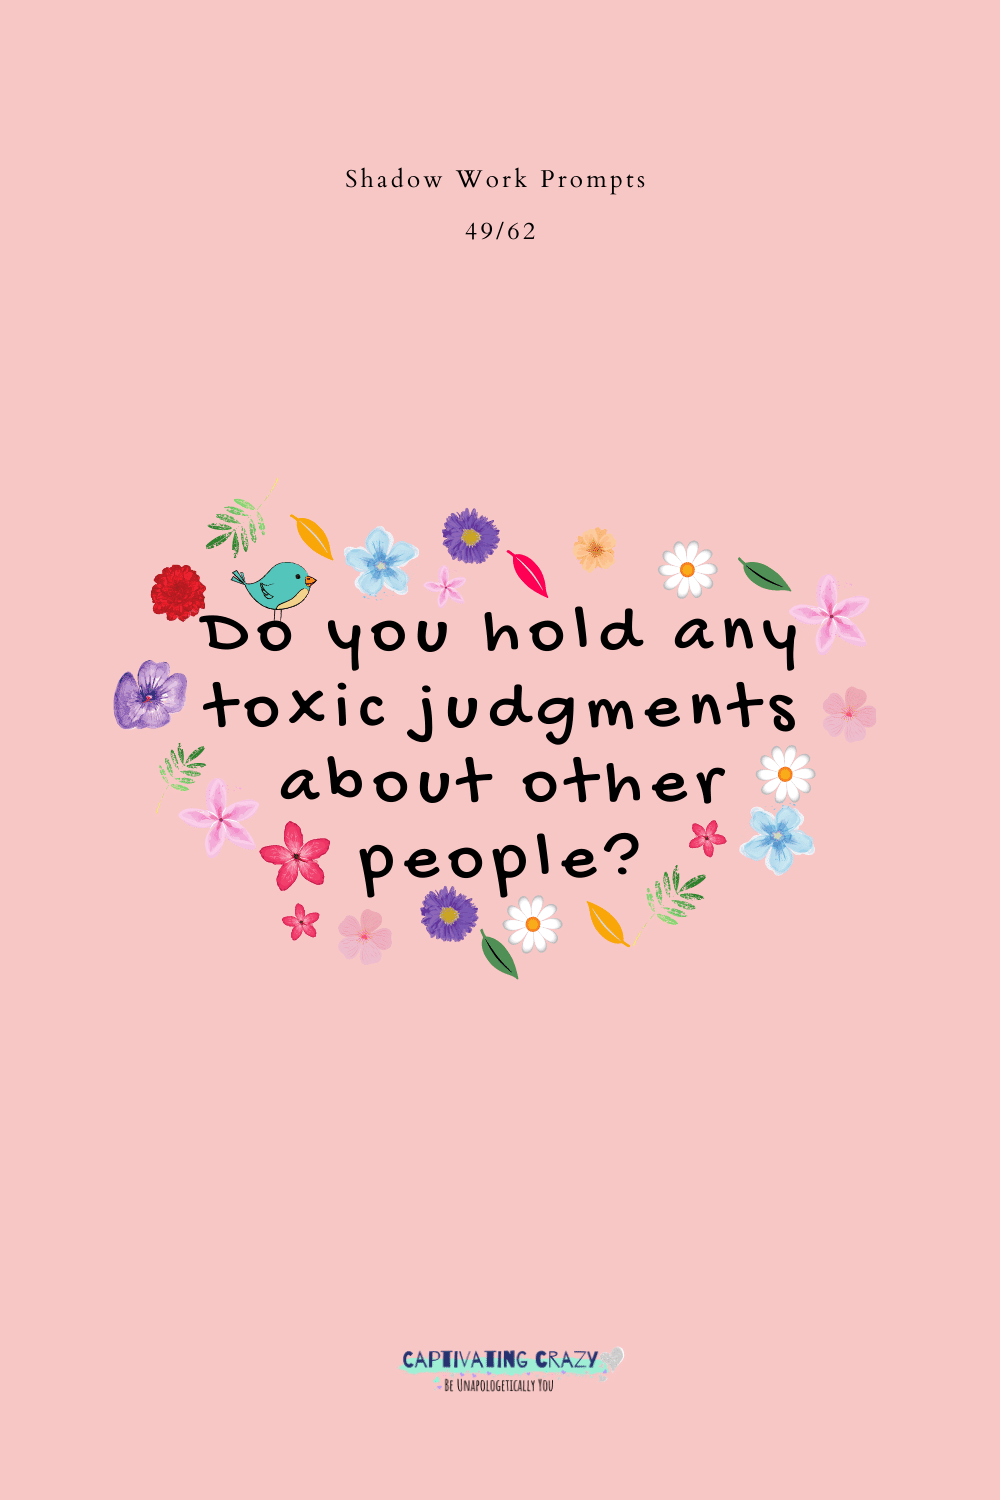 Do you hold any toxic judgments about other people?